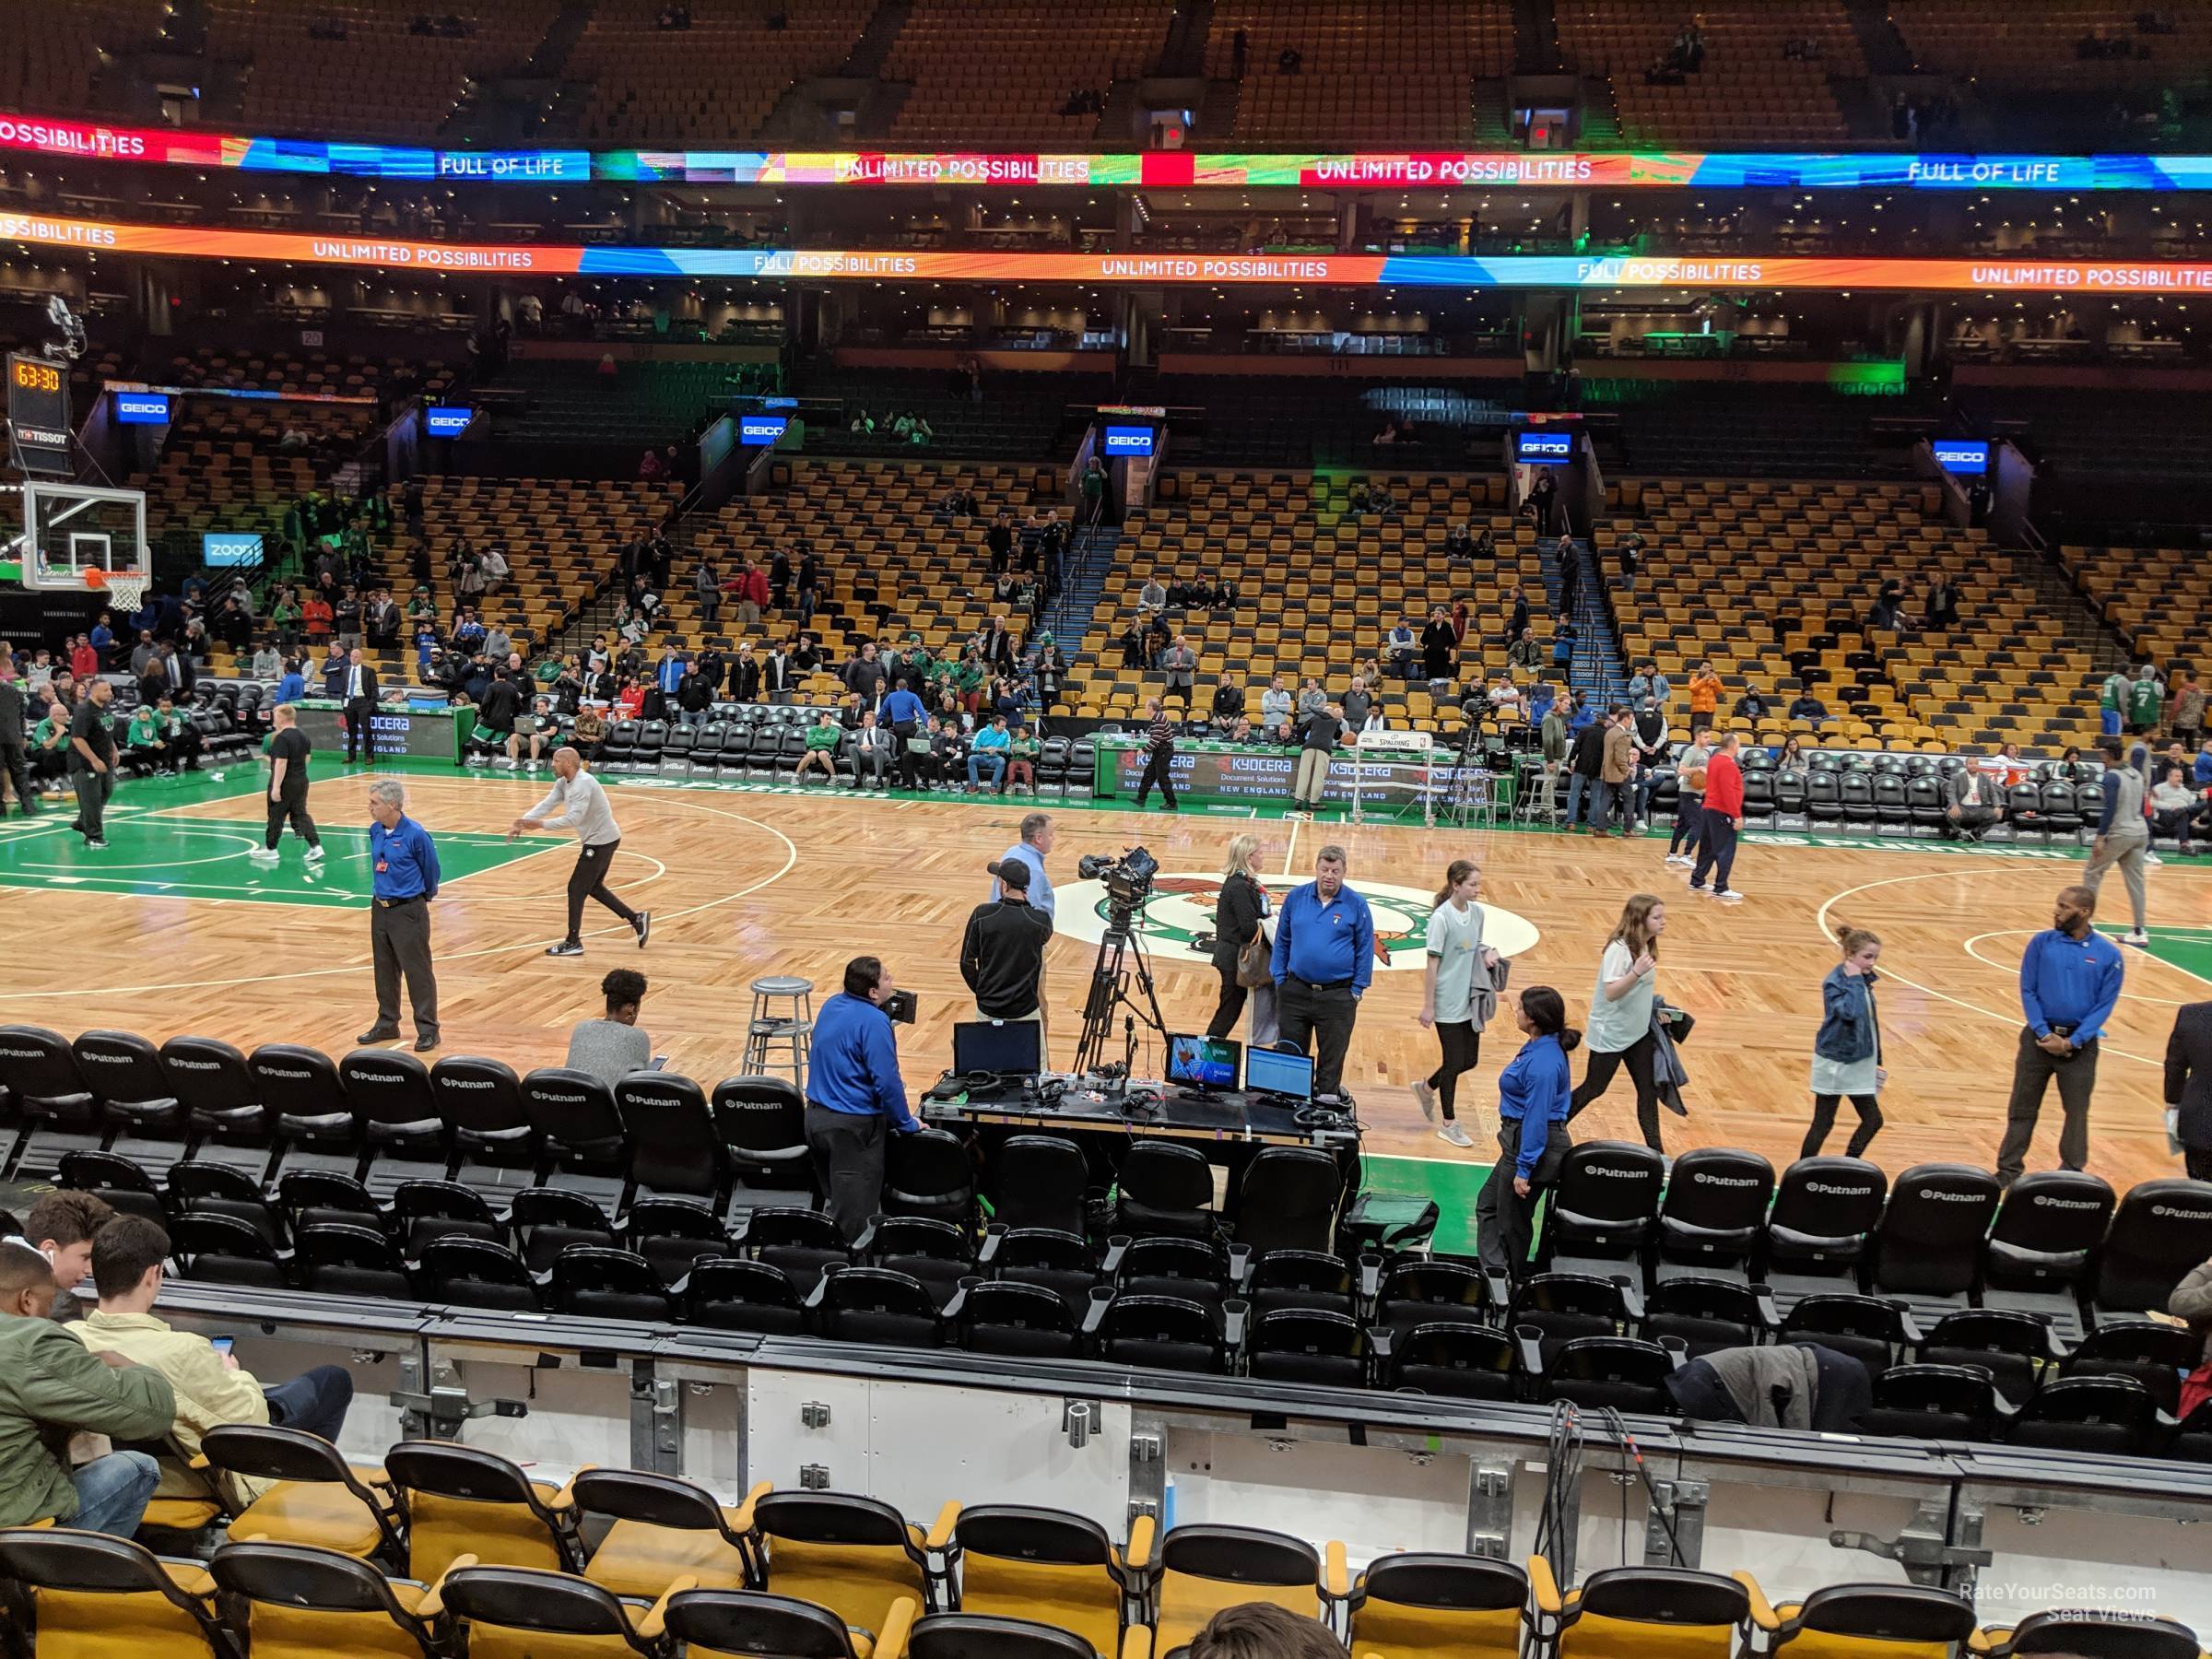 loge 12, row 7 seat view  for basketball - td garden